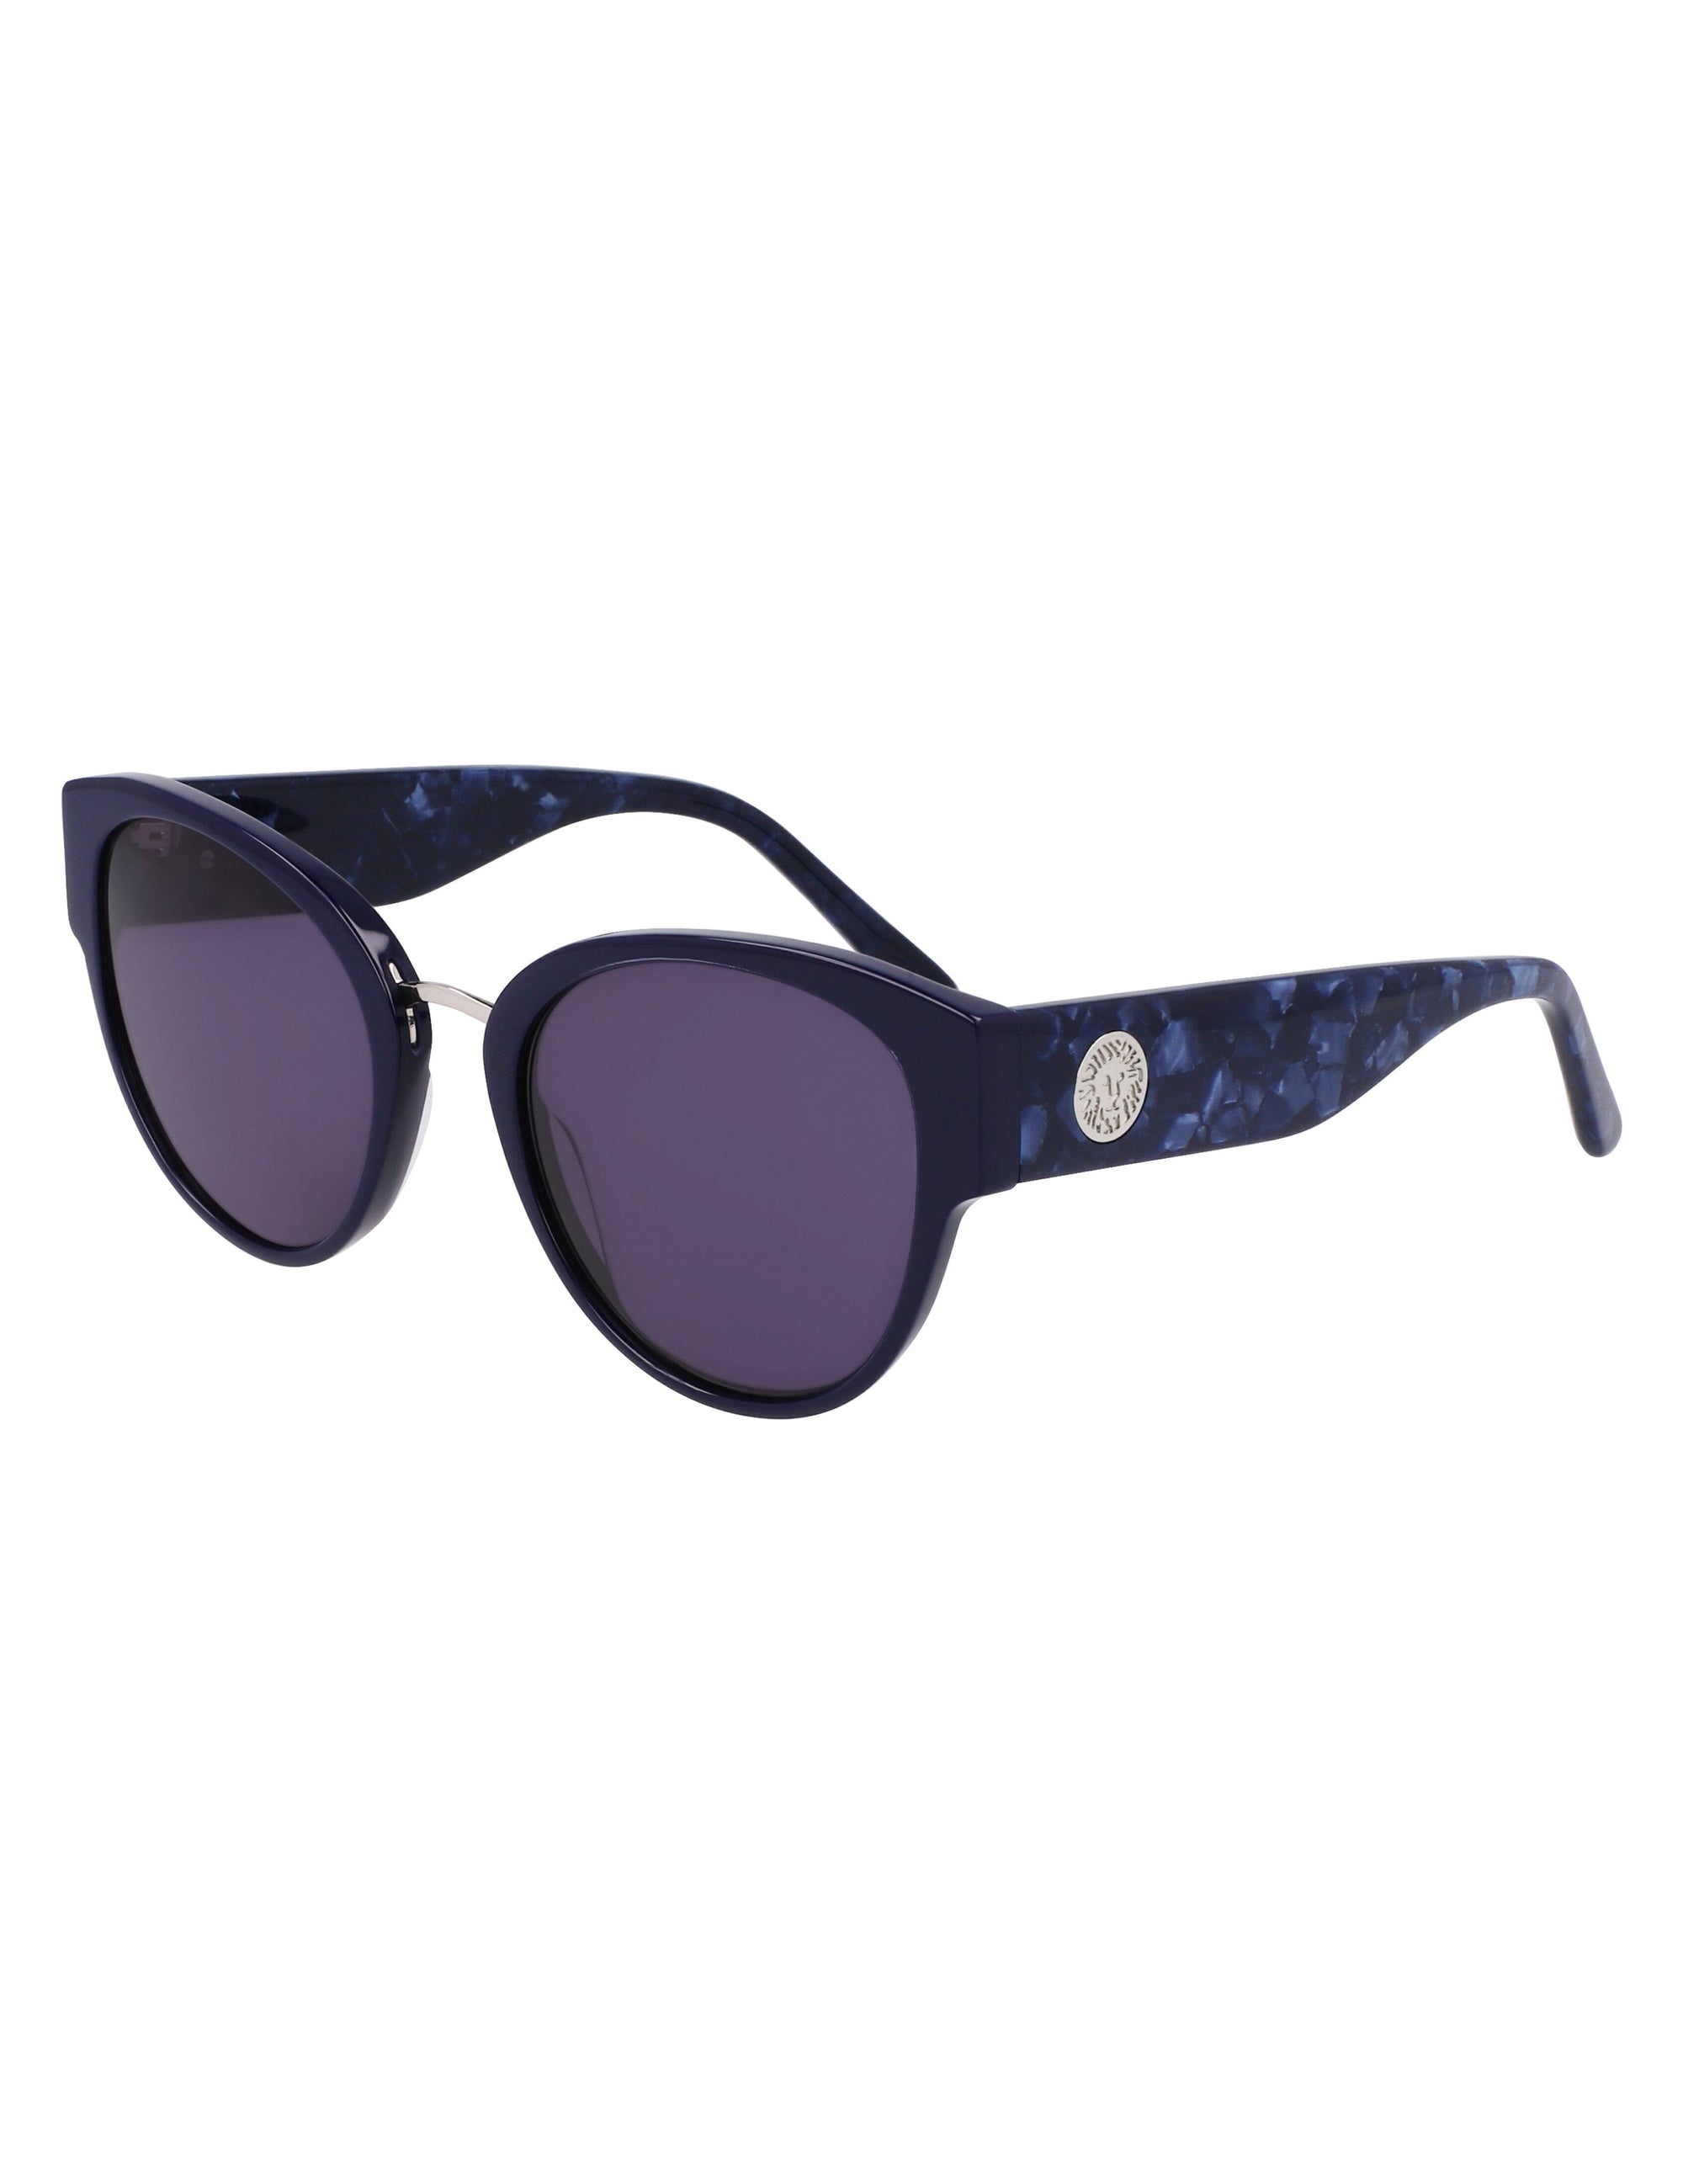 Anne Klein Navy Chic Rounded Cat-Eye Sunglasses